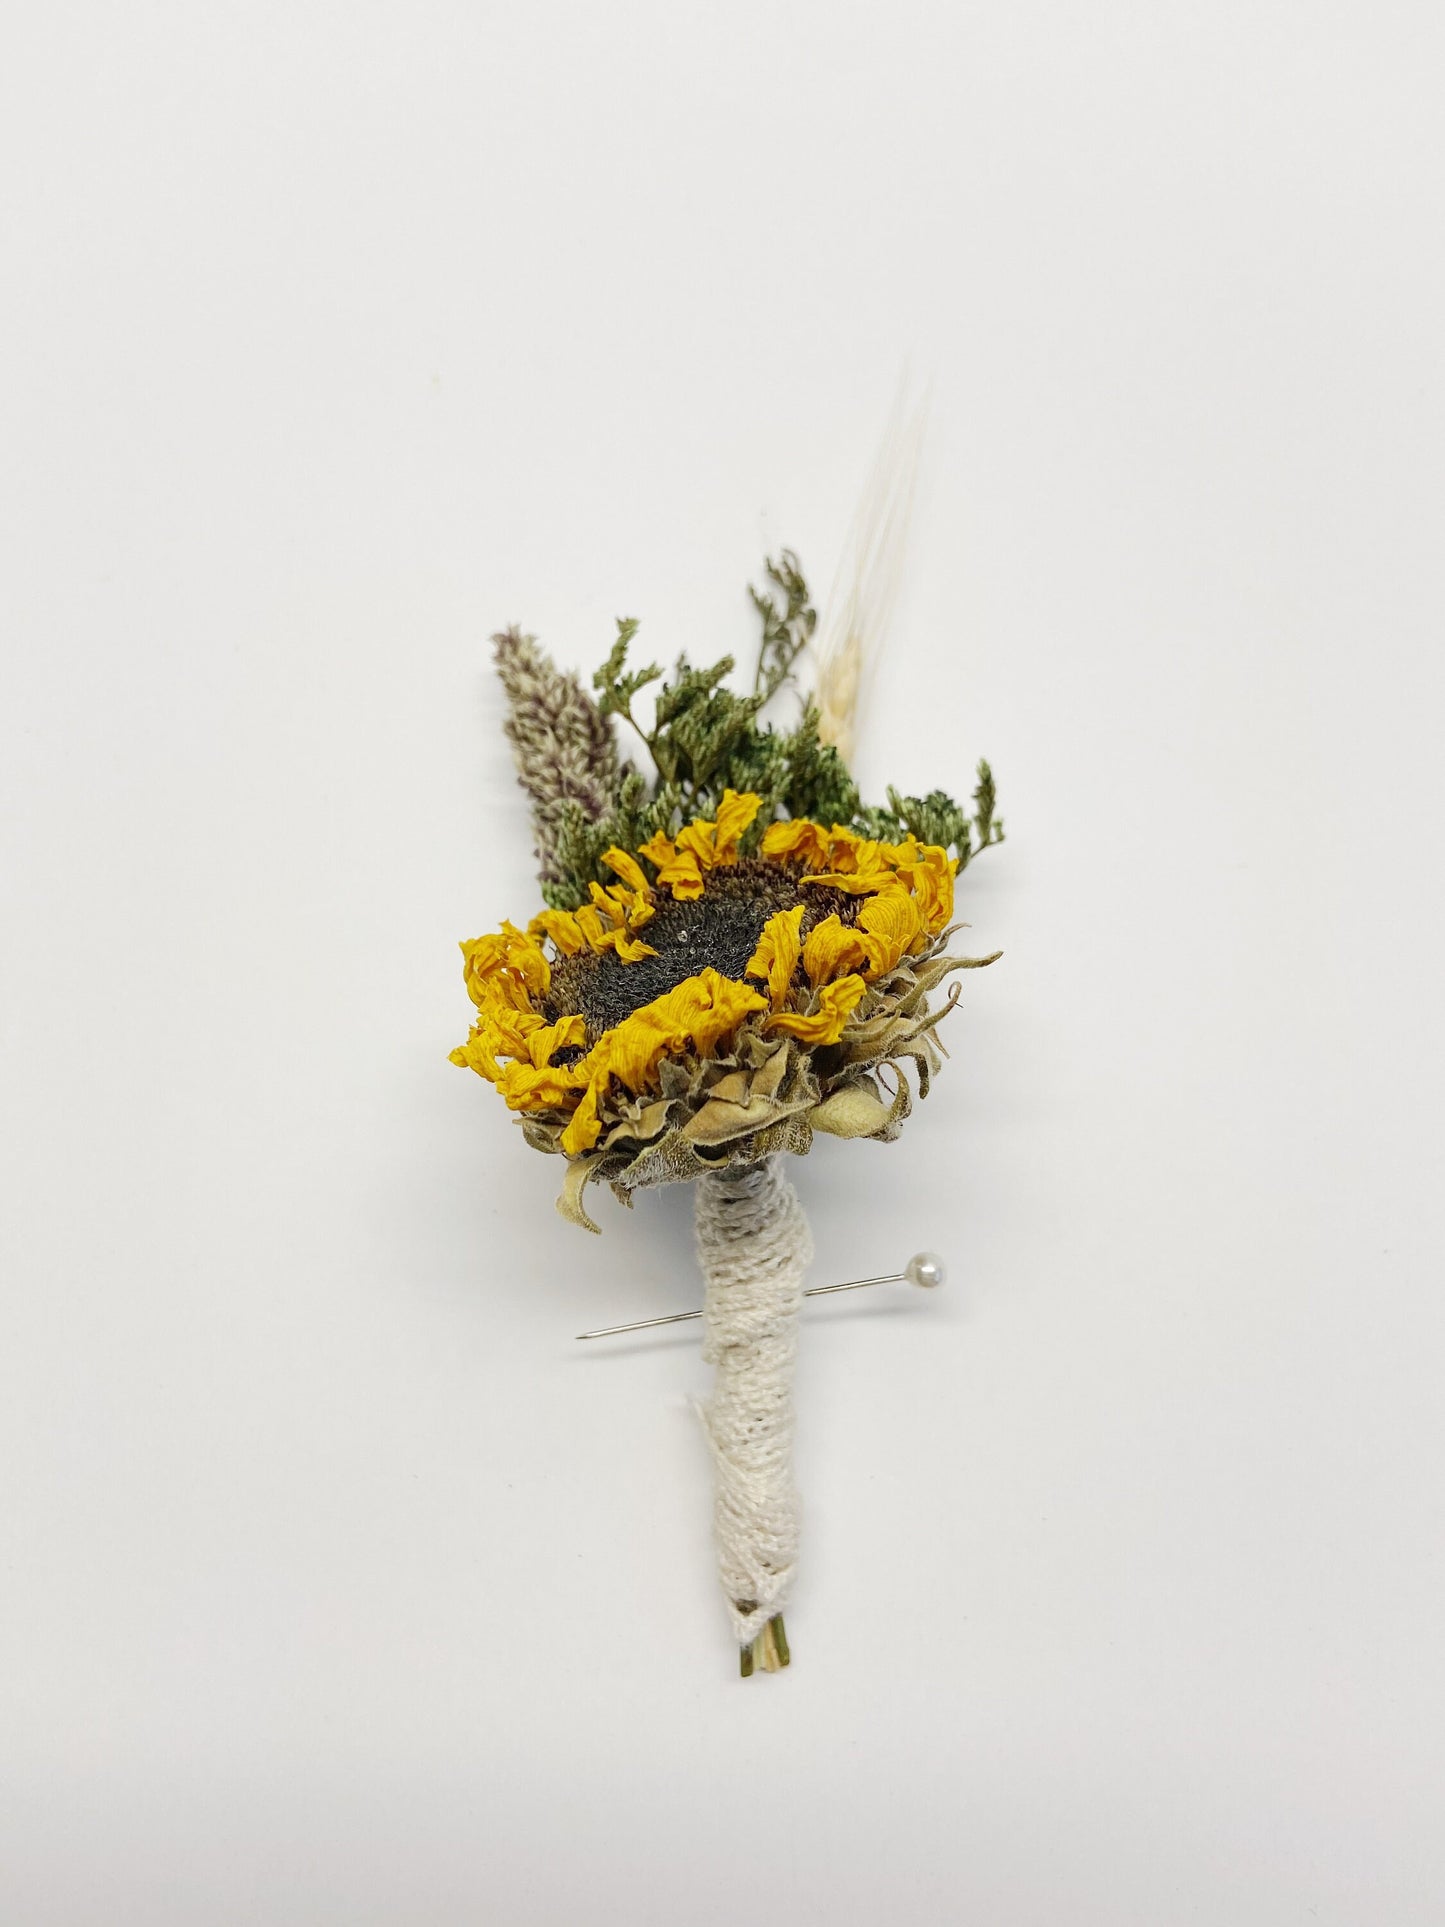 Wedding Boutonniere, Dried flowers, Preserved, Wedding Accessory, House Decoration, Rustic Wedding, Simplicity, Simple, Neutral